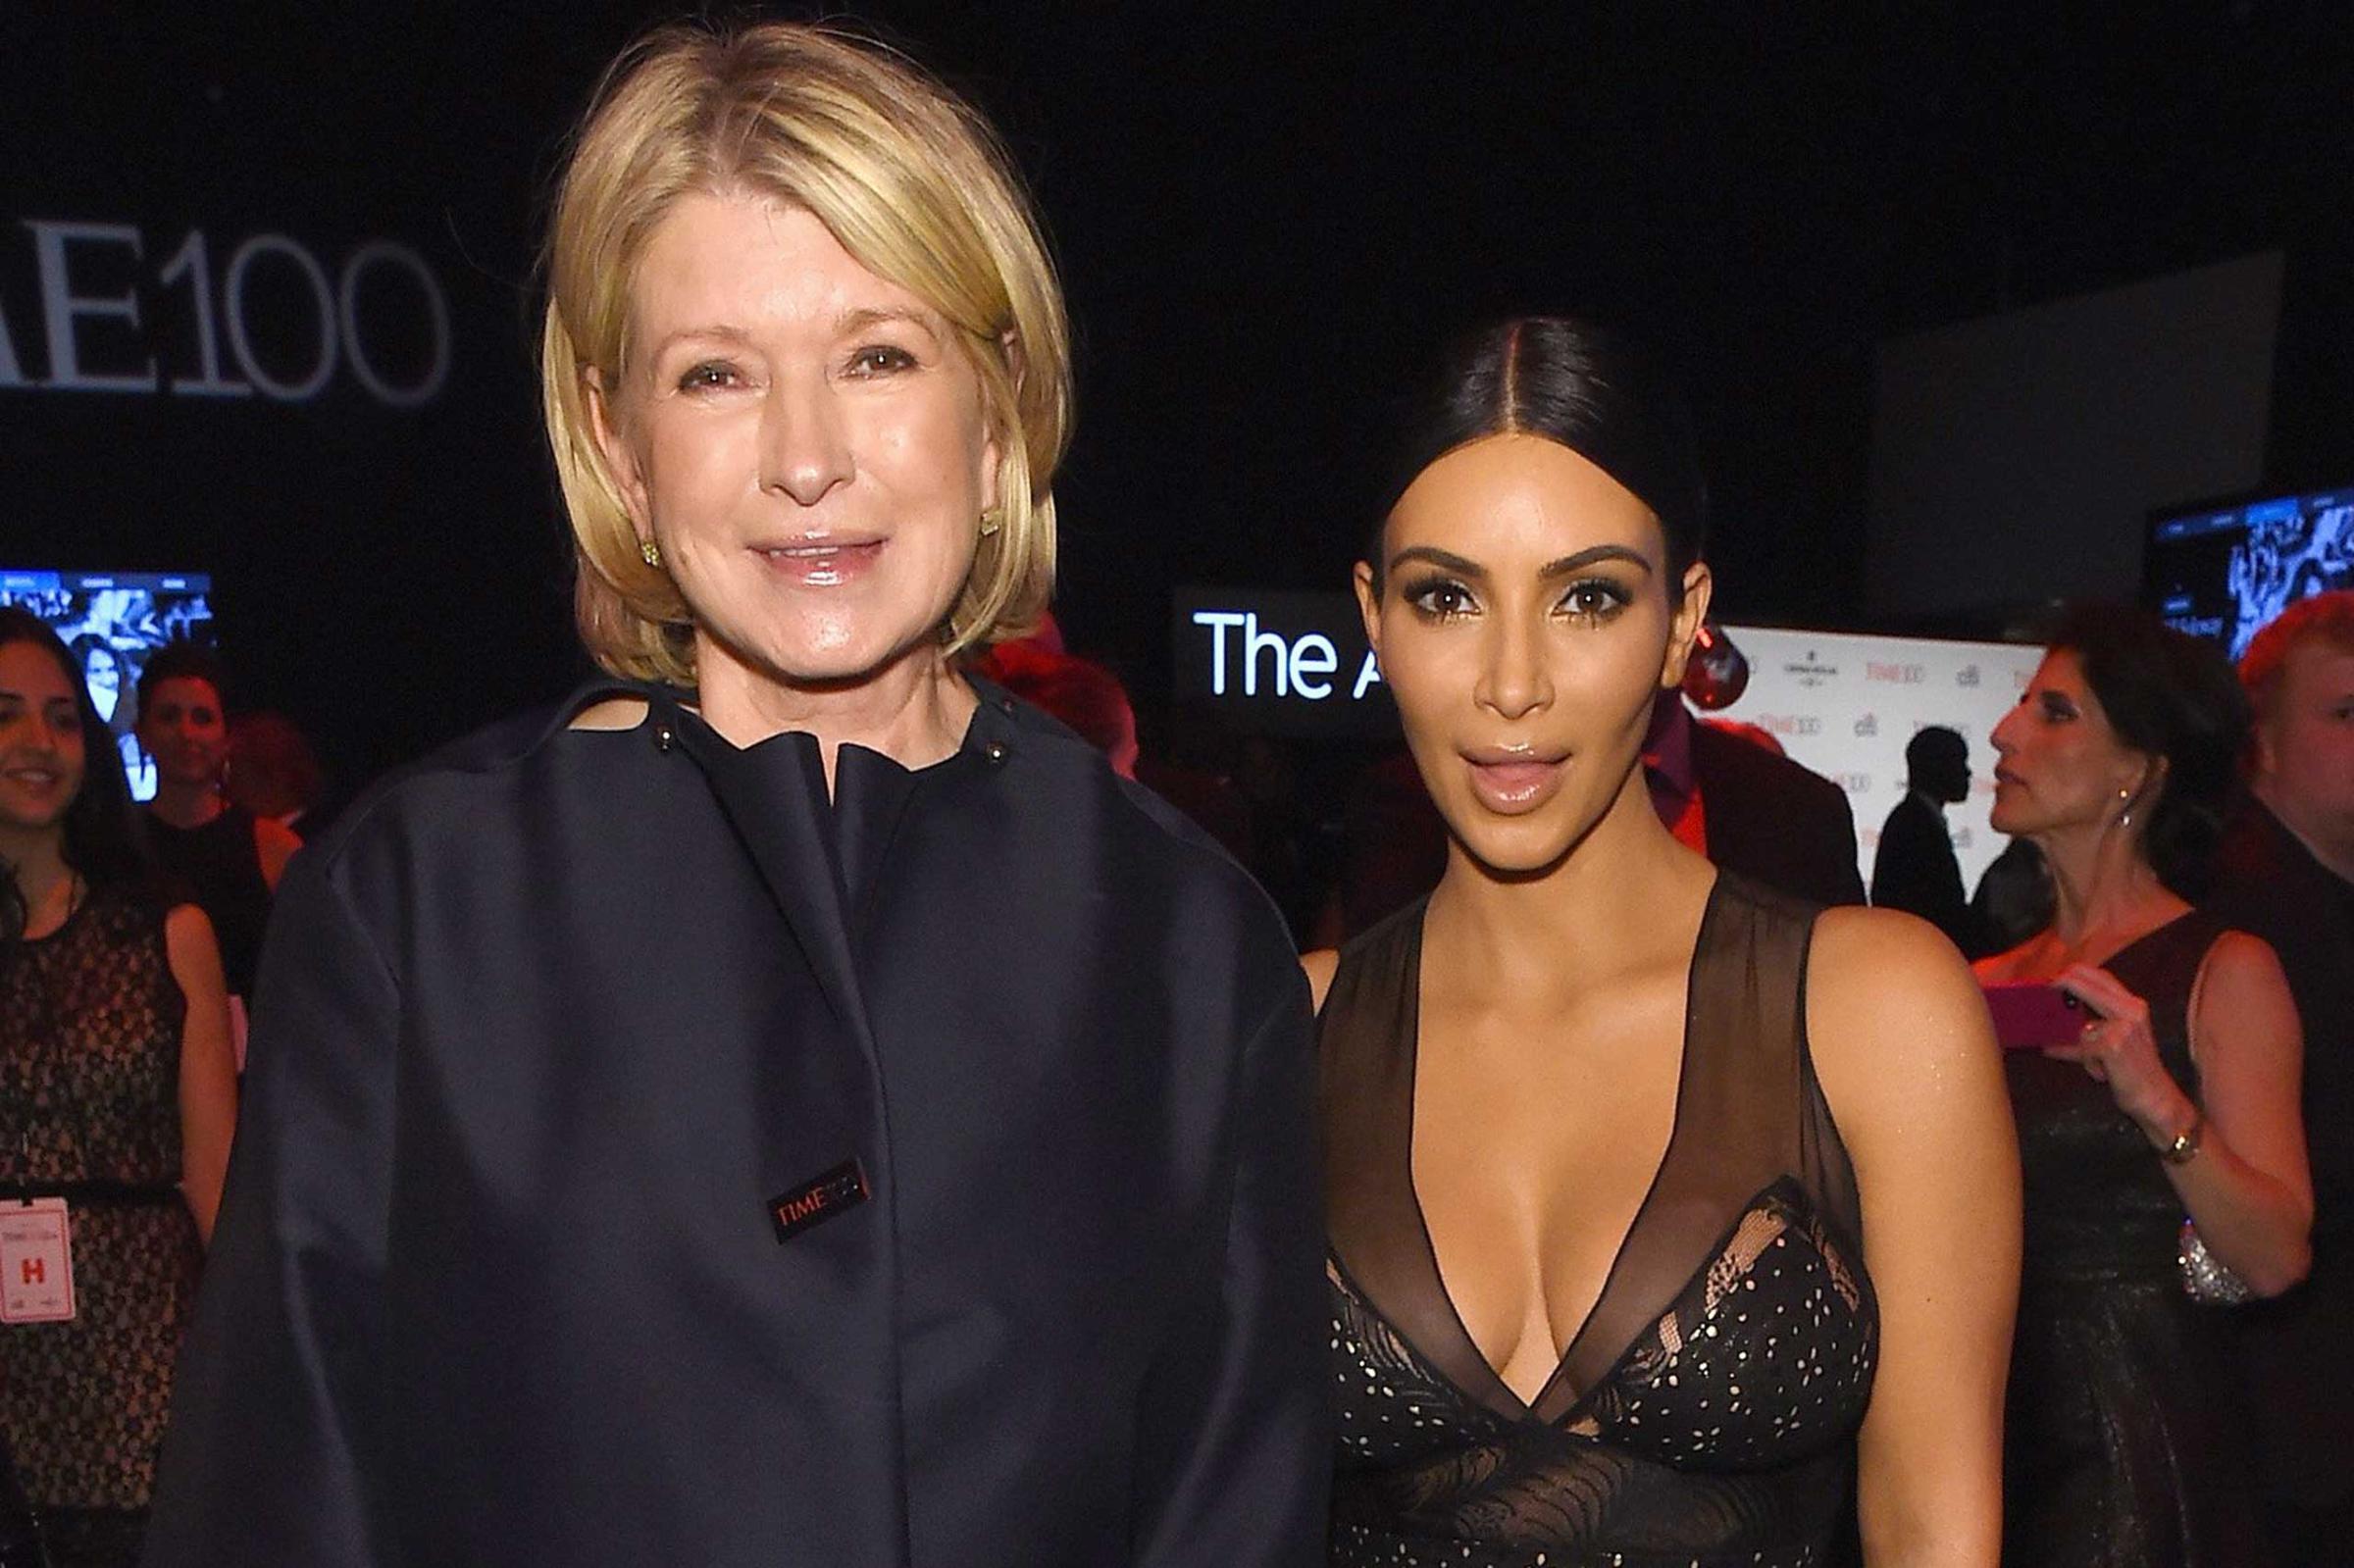 Martha Stewart and Kim Kardashian attend the TIME 100 Gala at Jazz at Lincoln Center in New York City on April 21, 2015.